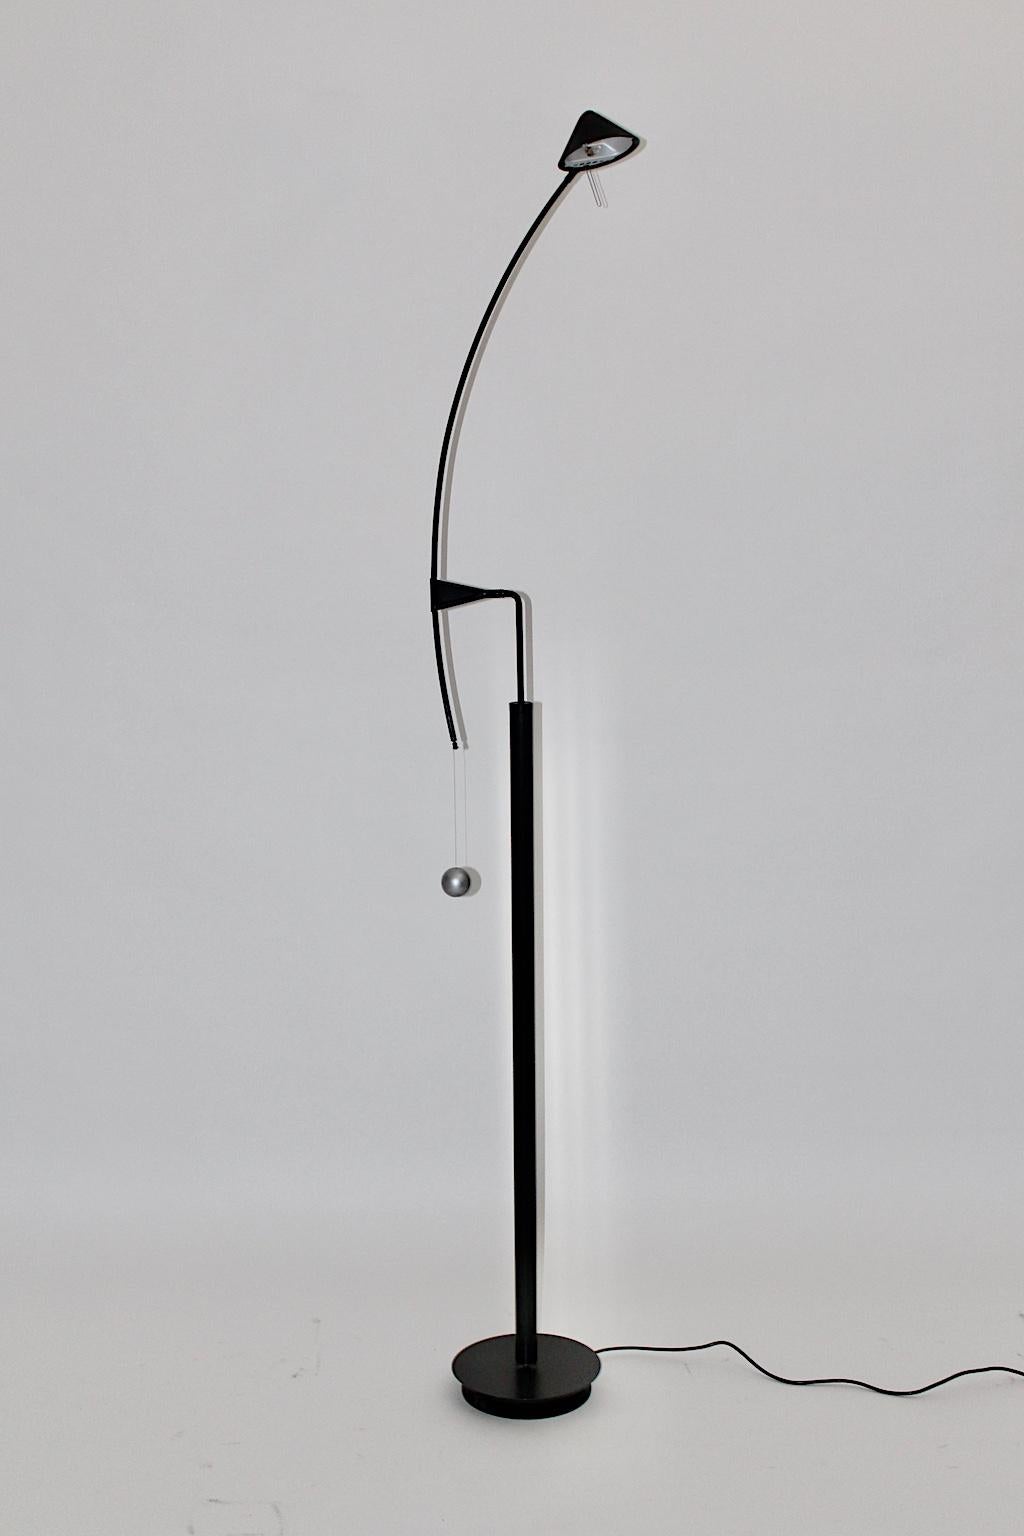 Postmodern Vintage Black Floor Lamp by Carlo Forcolini 1989 for Artemide Italy For Sale 7